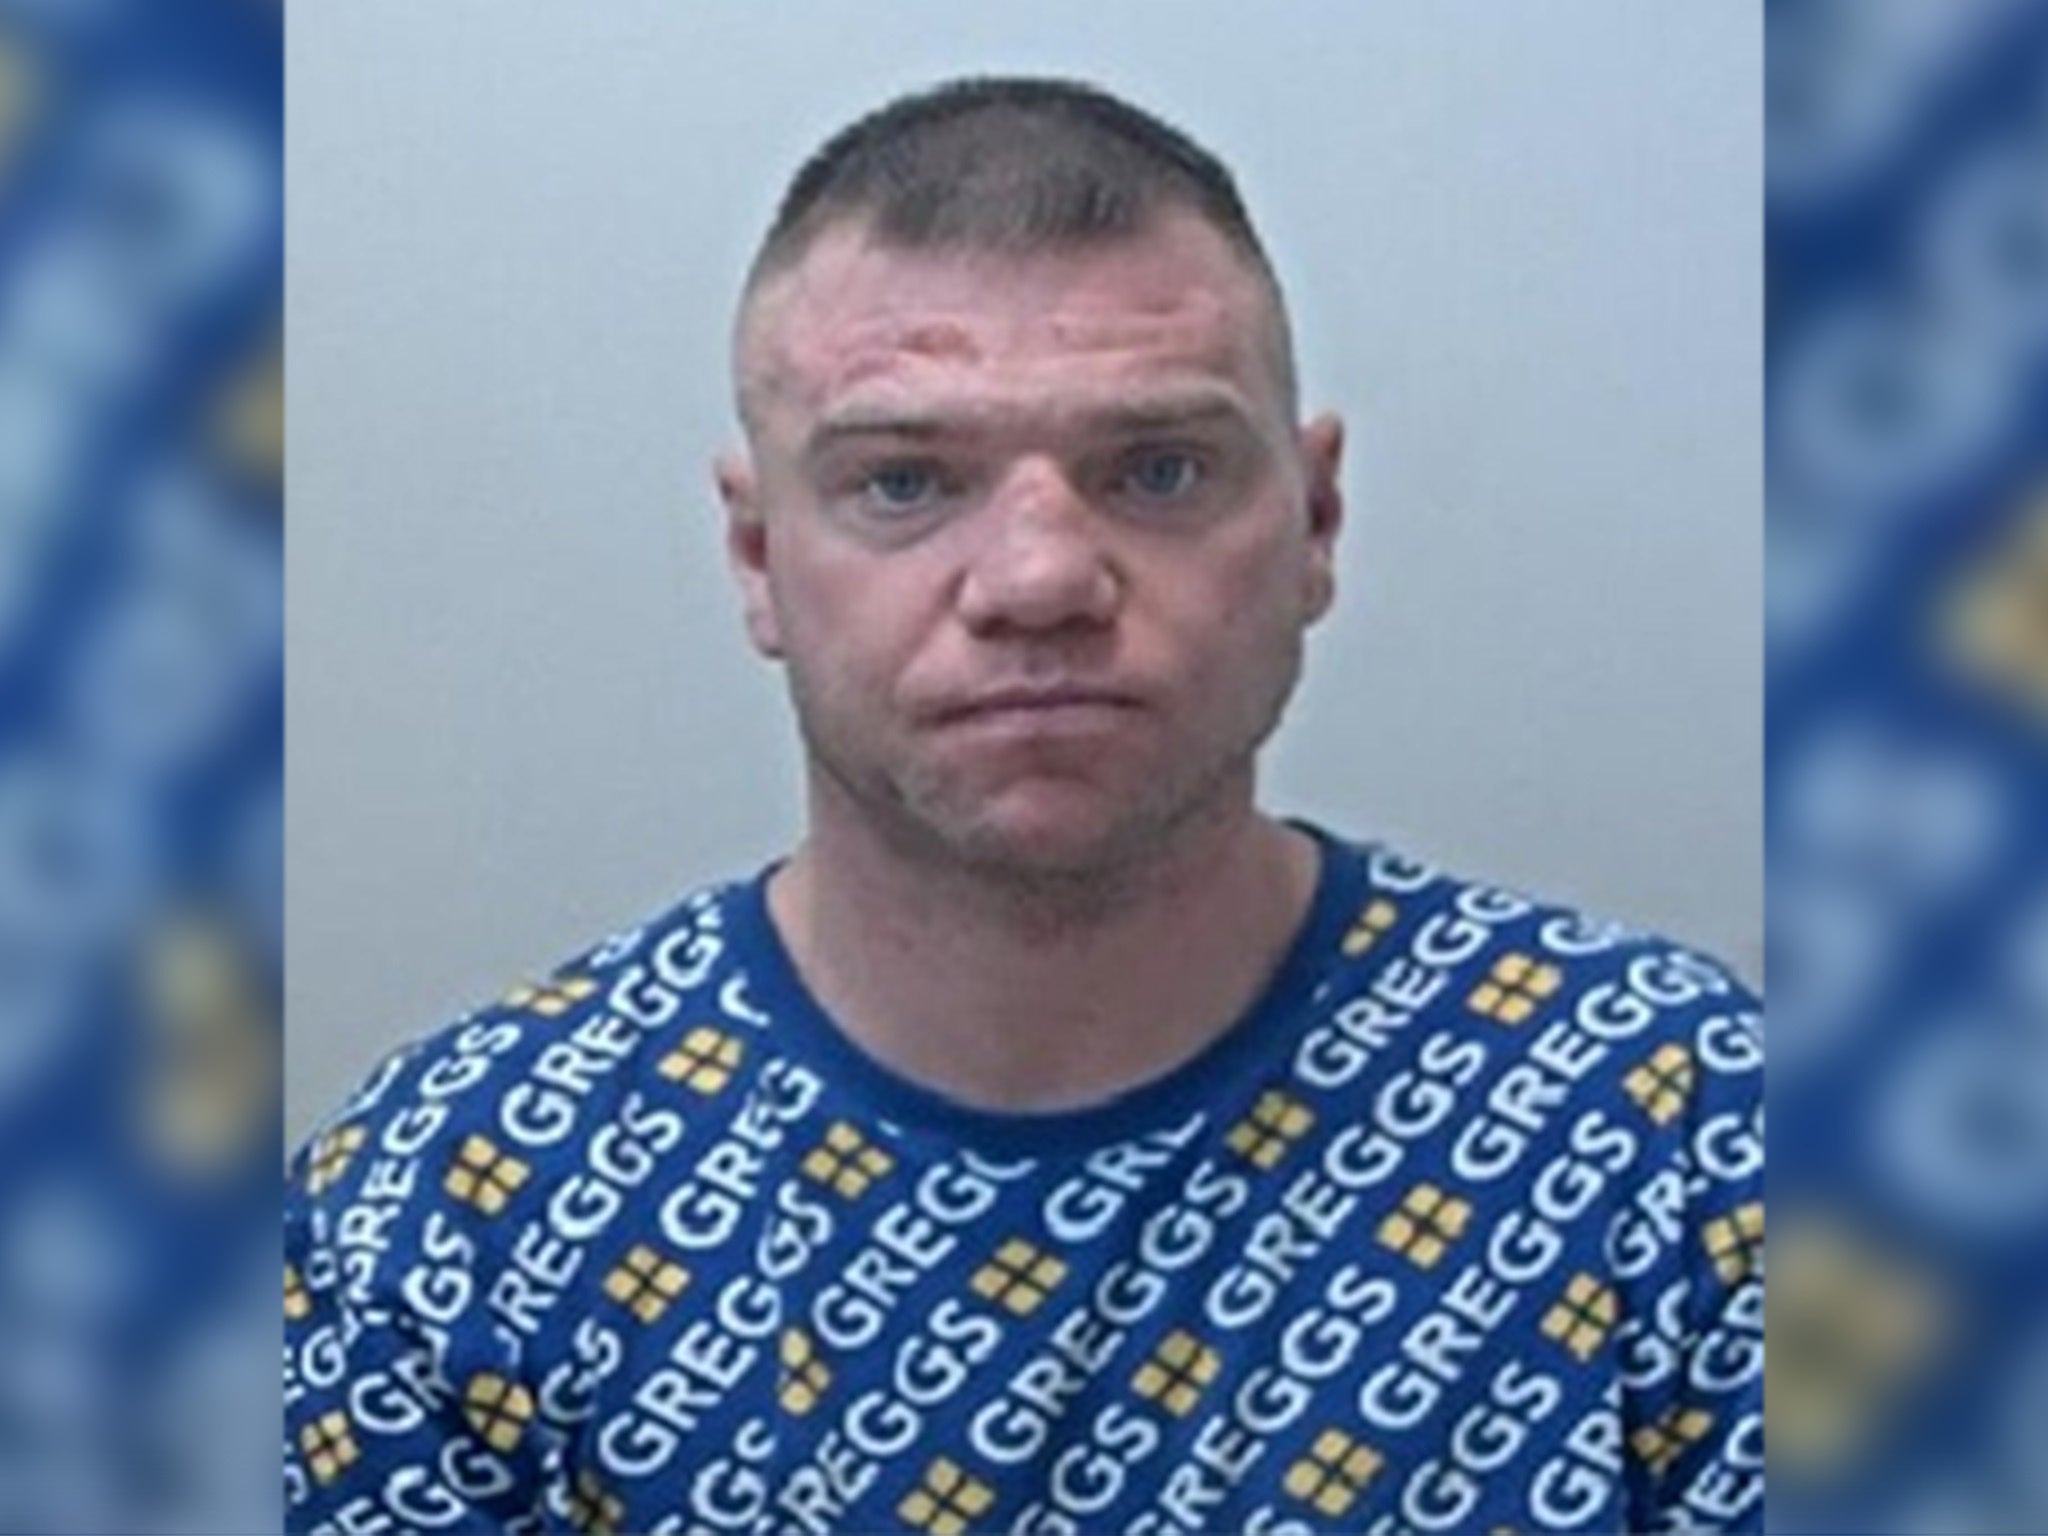 Shaun Aver was located in Merseyside and arrested